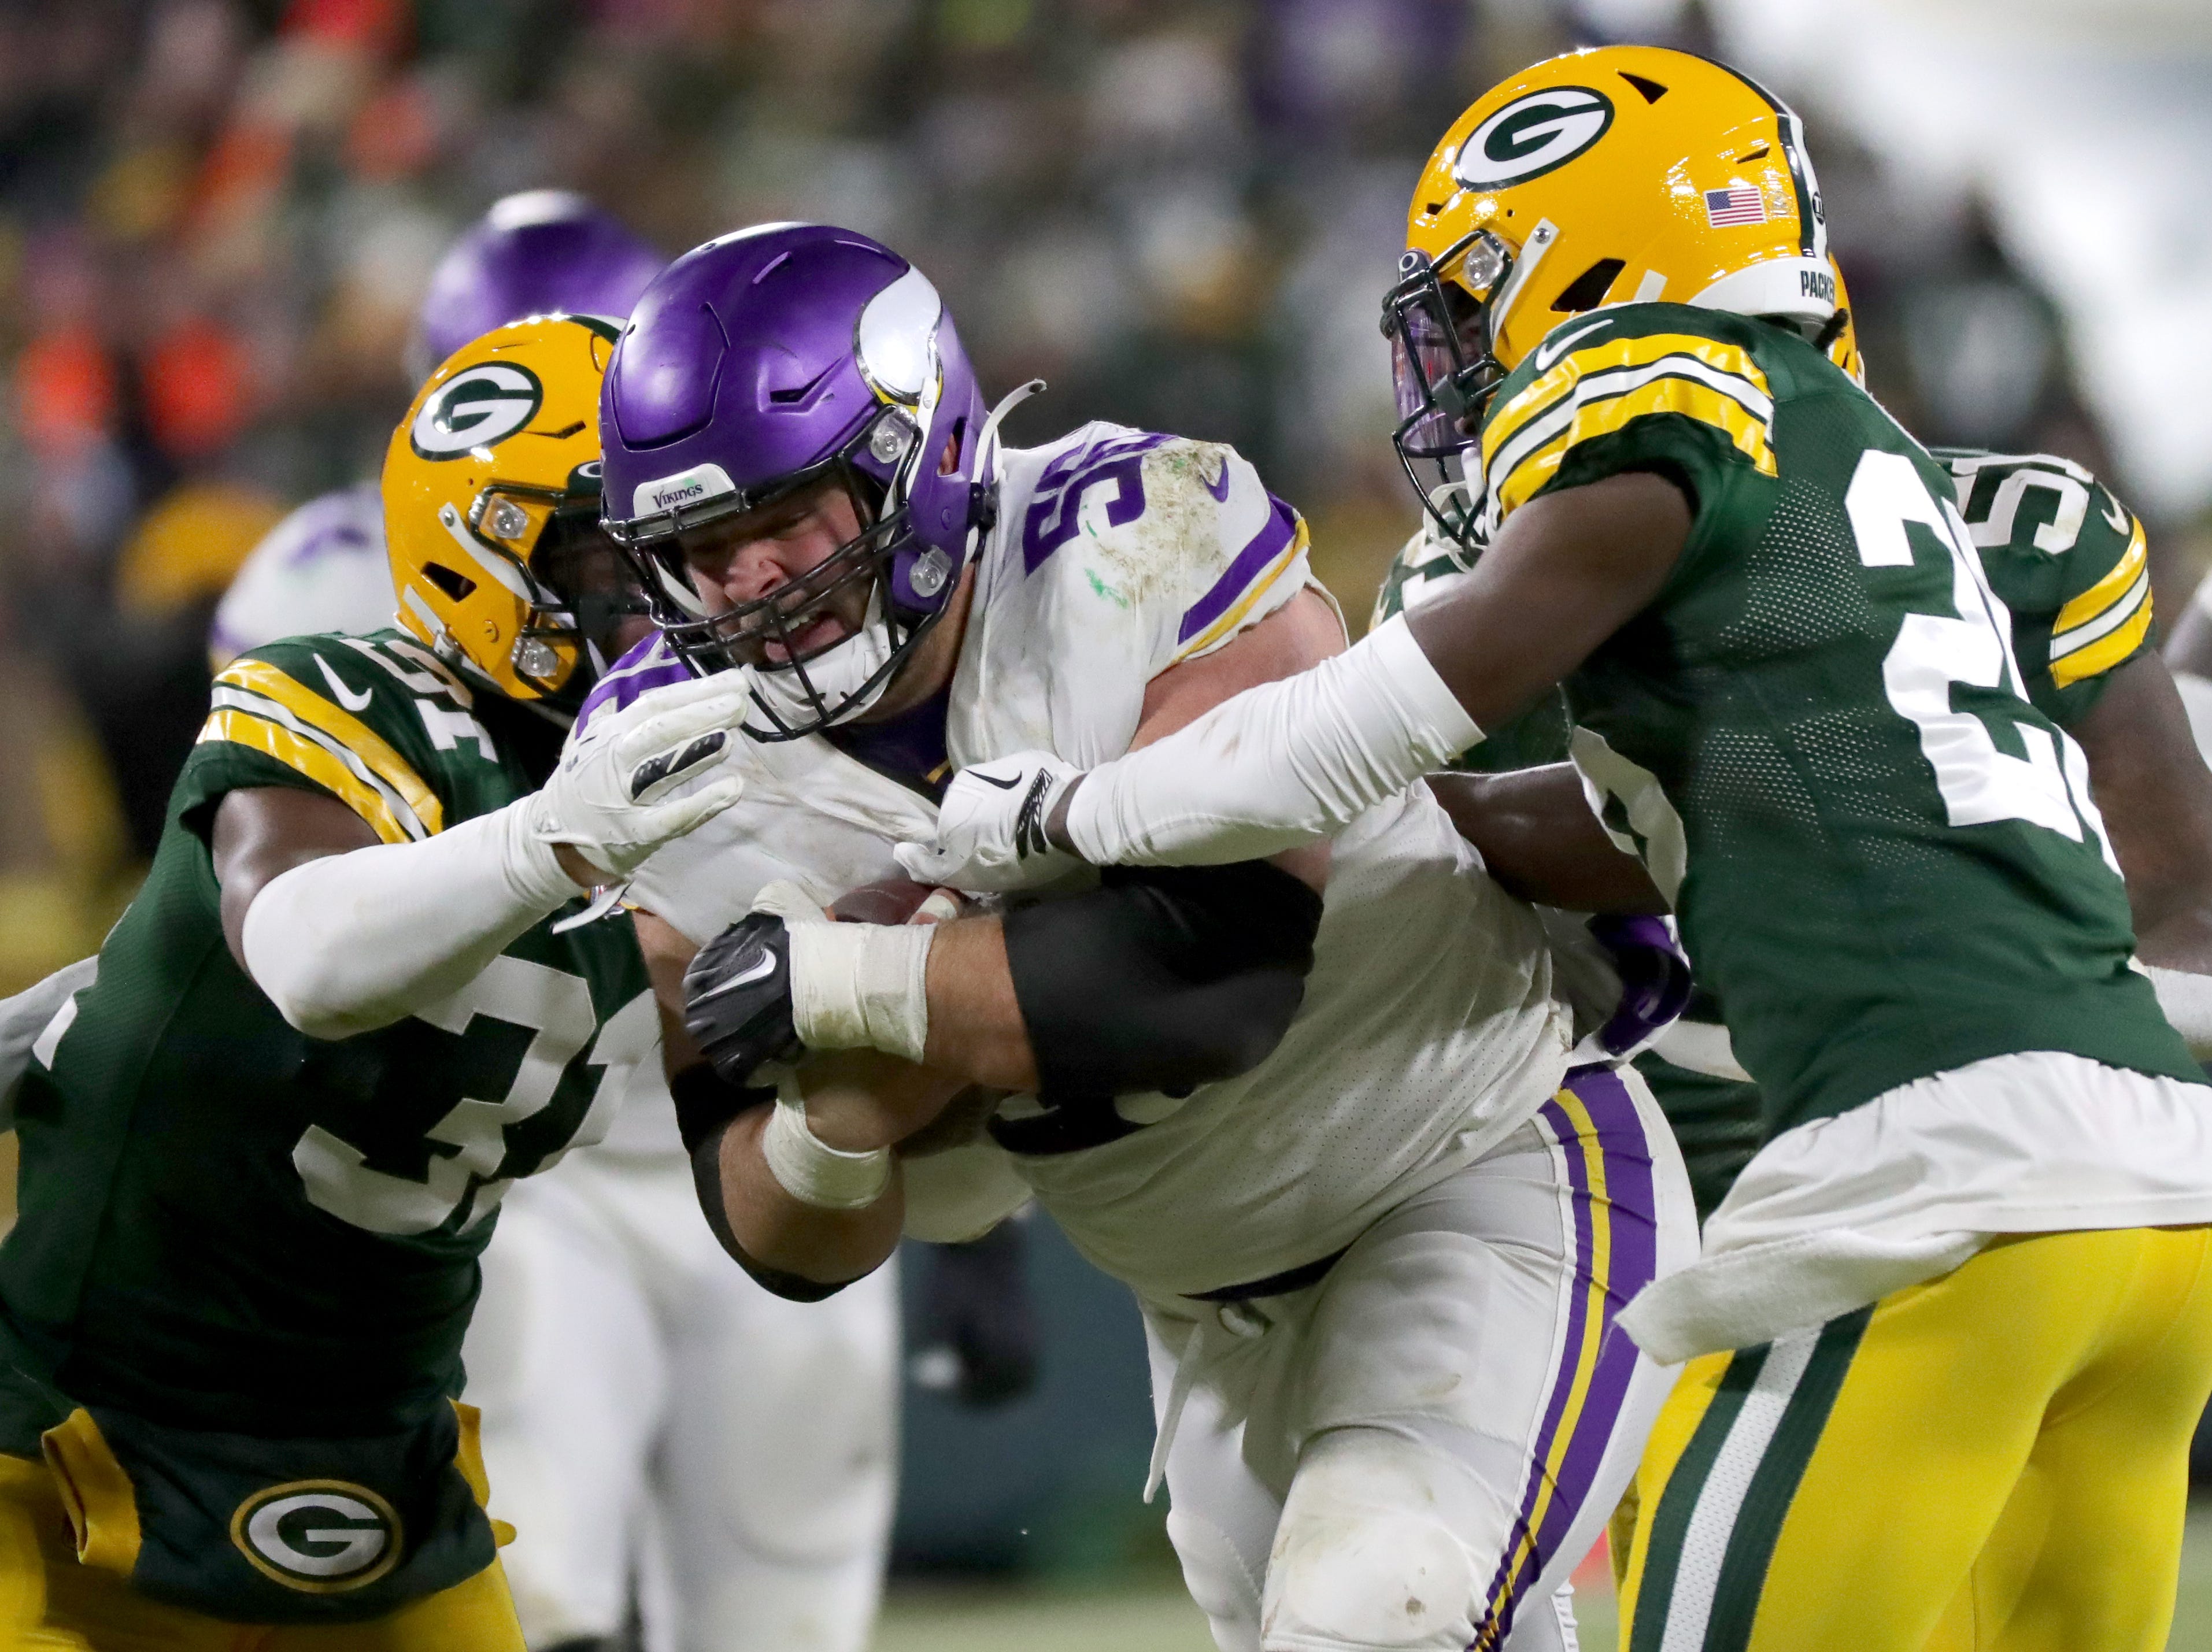 NFL Schedule News: Vikings to Play Packers at Lambeau Field on